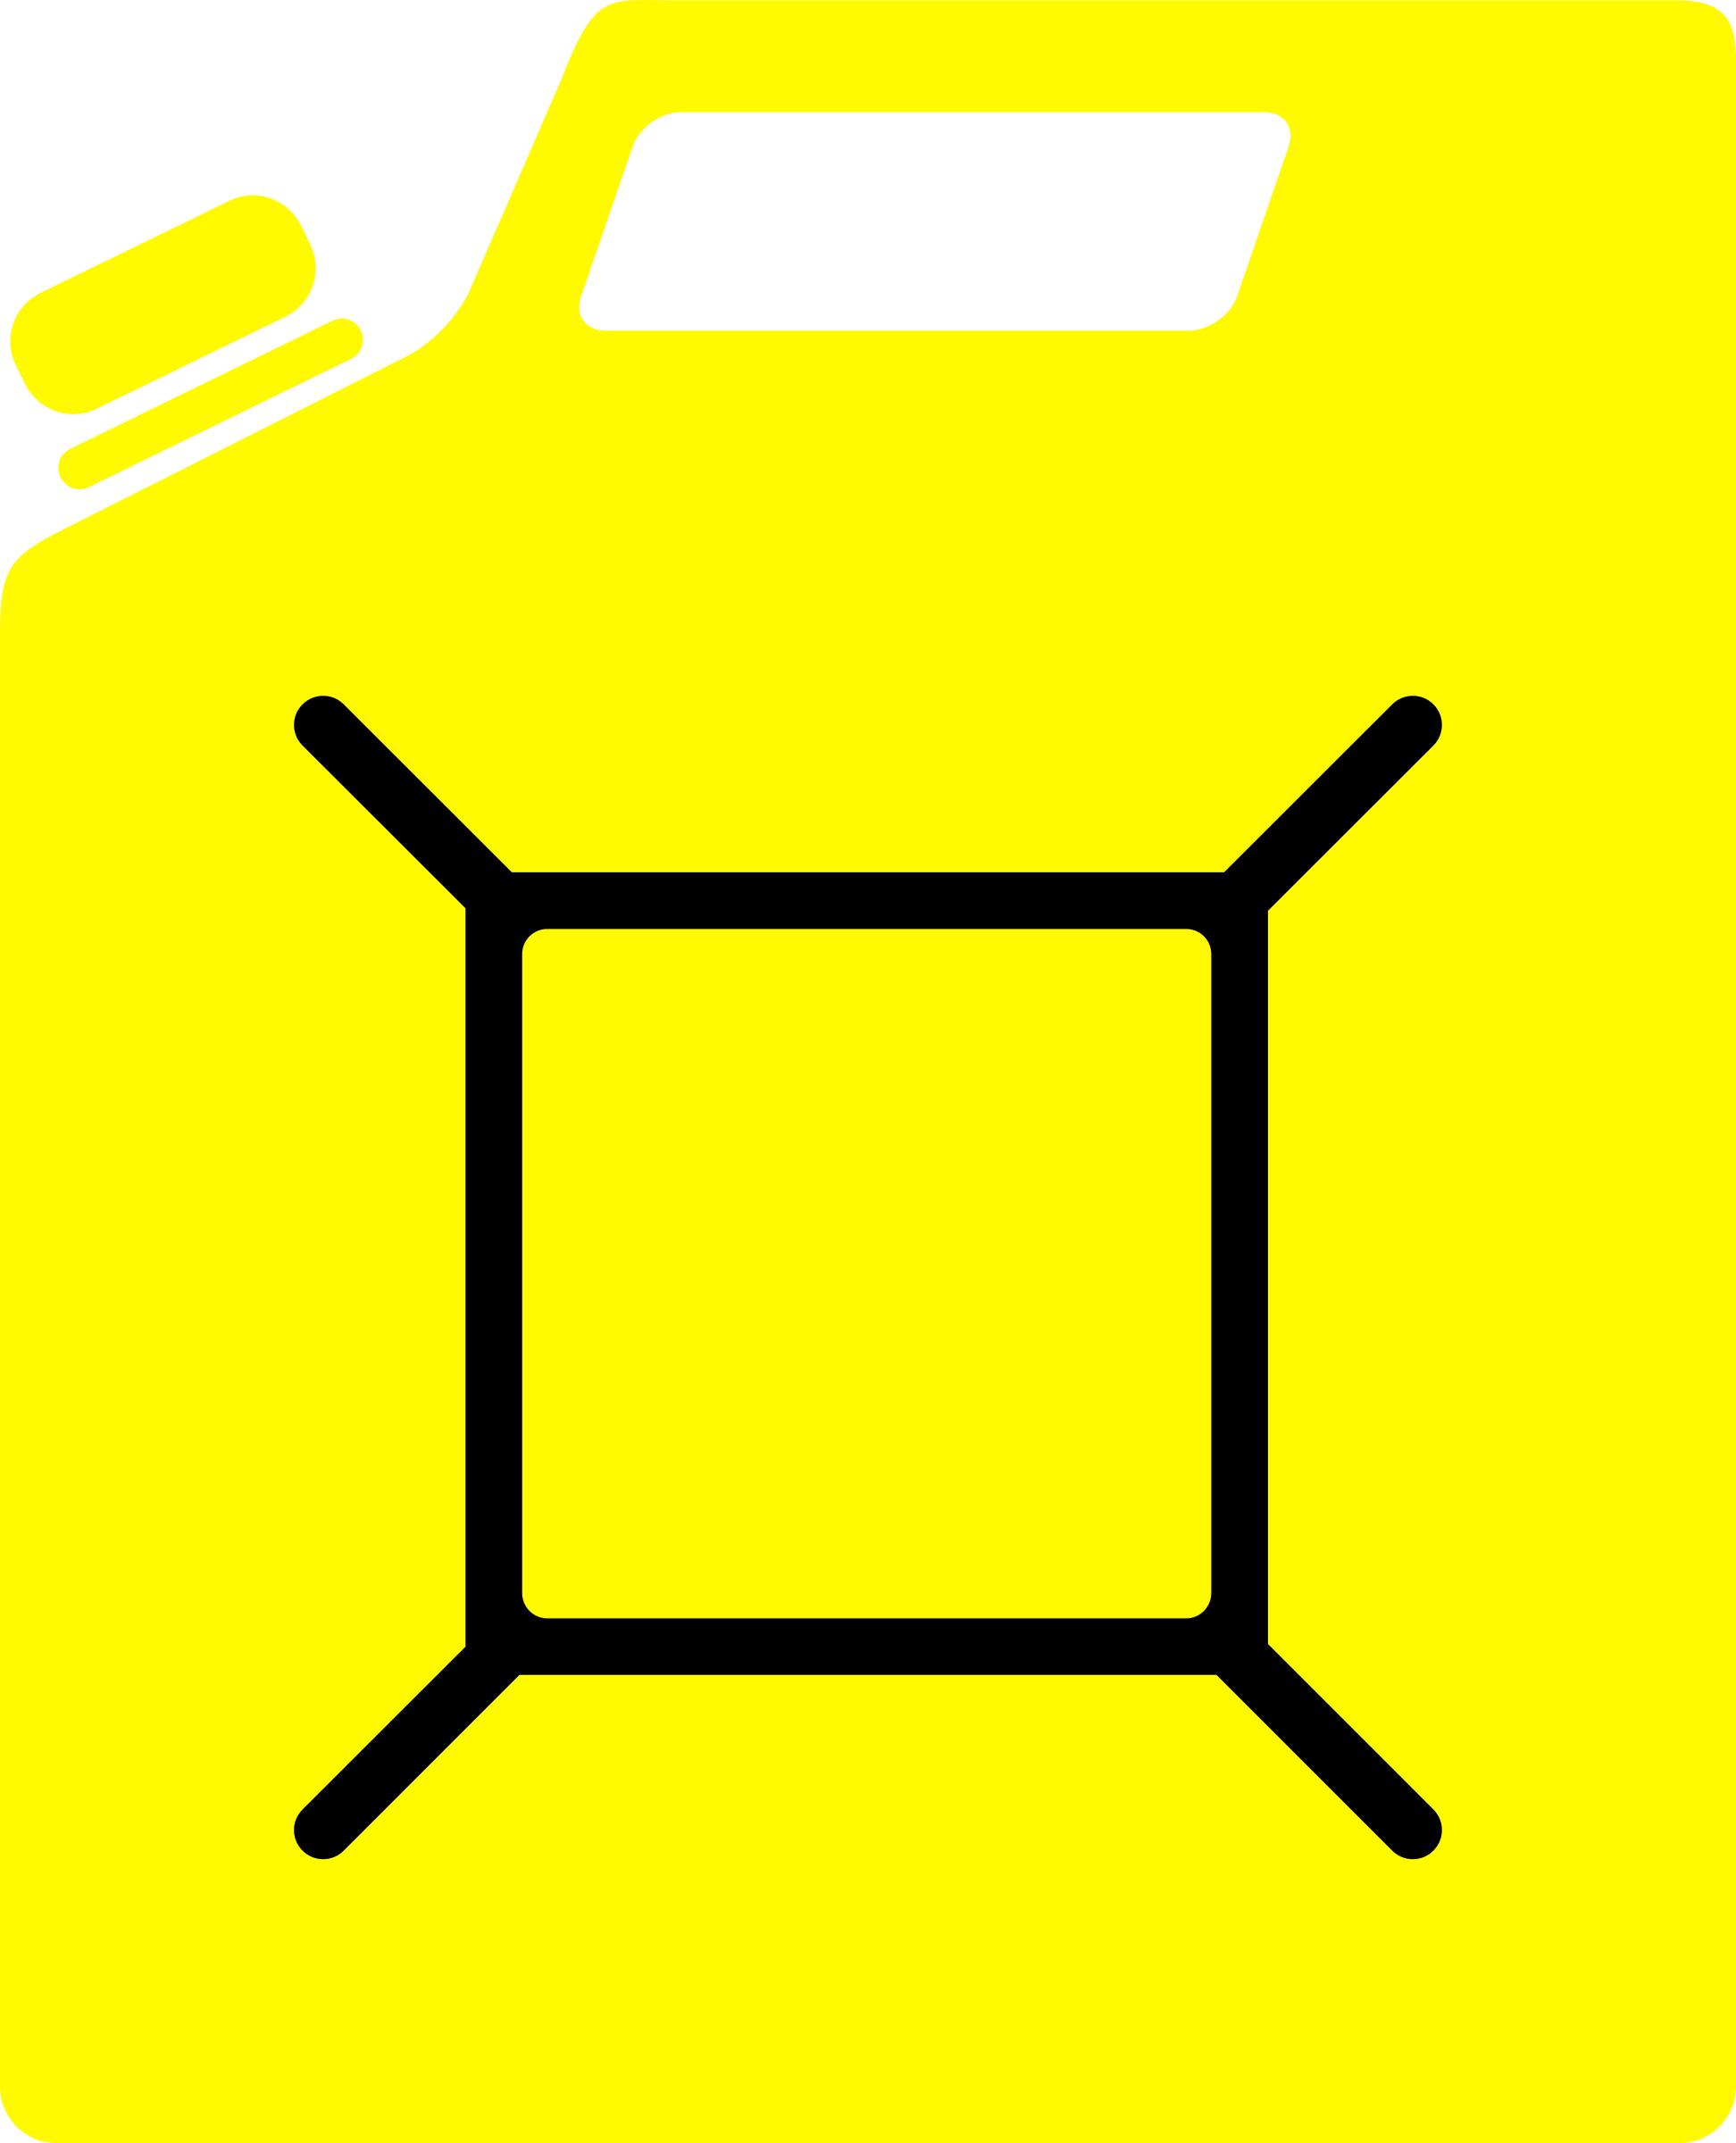 Jerrycan short png